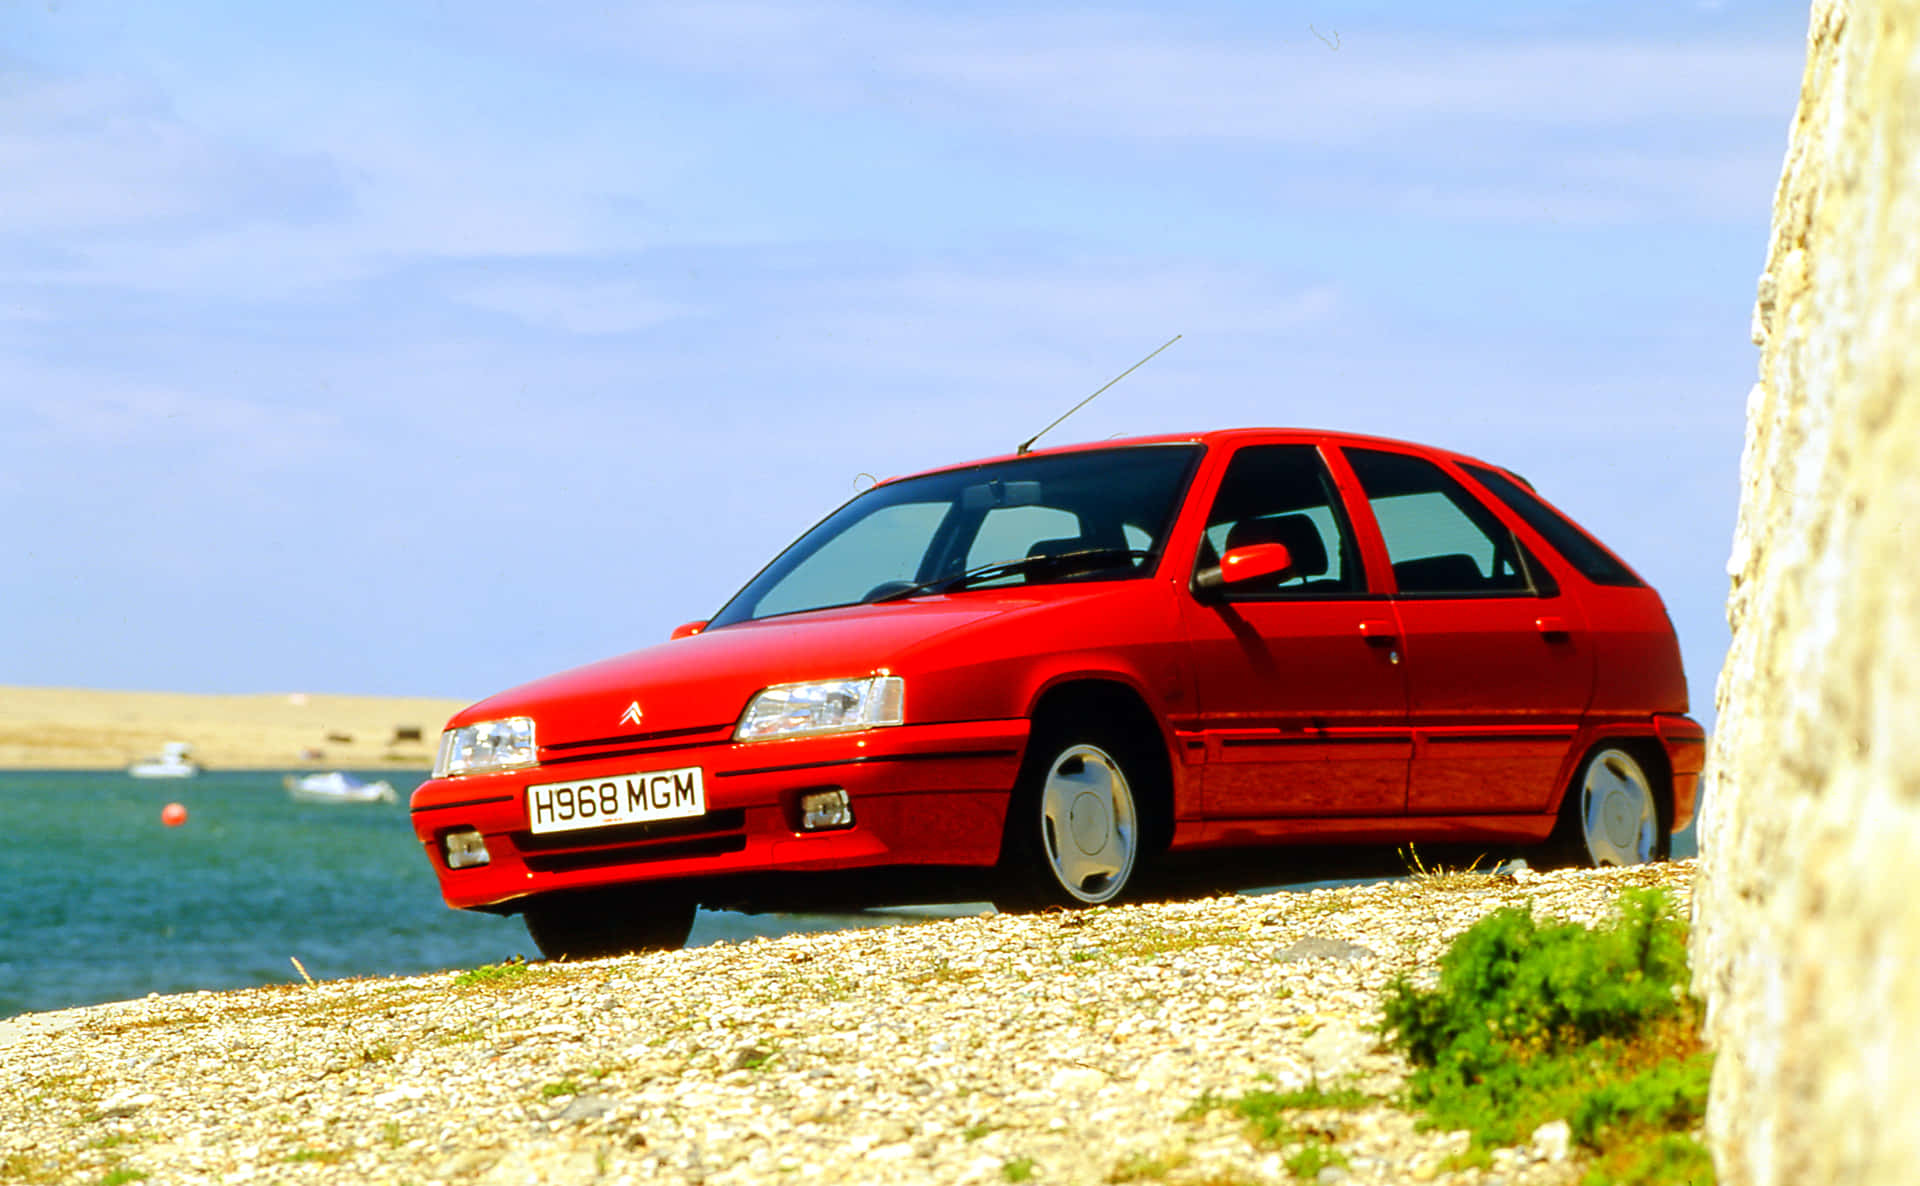 "a Vintage Citroen Zx Displayed On A Beautiful Sunlit Road" Wallpaper